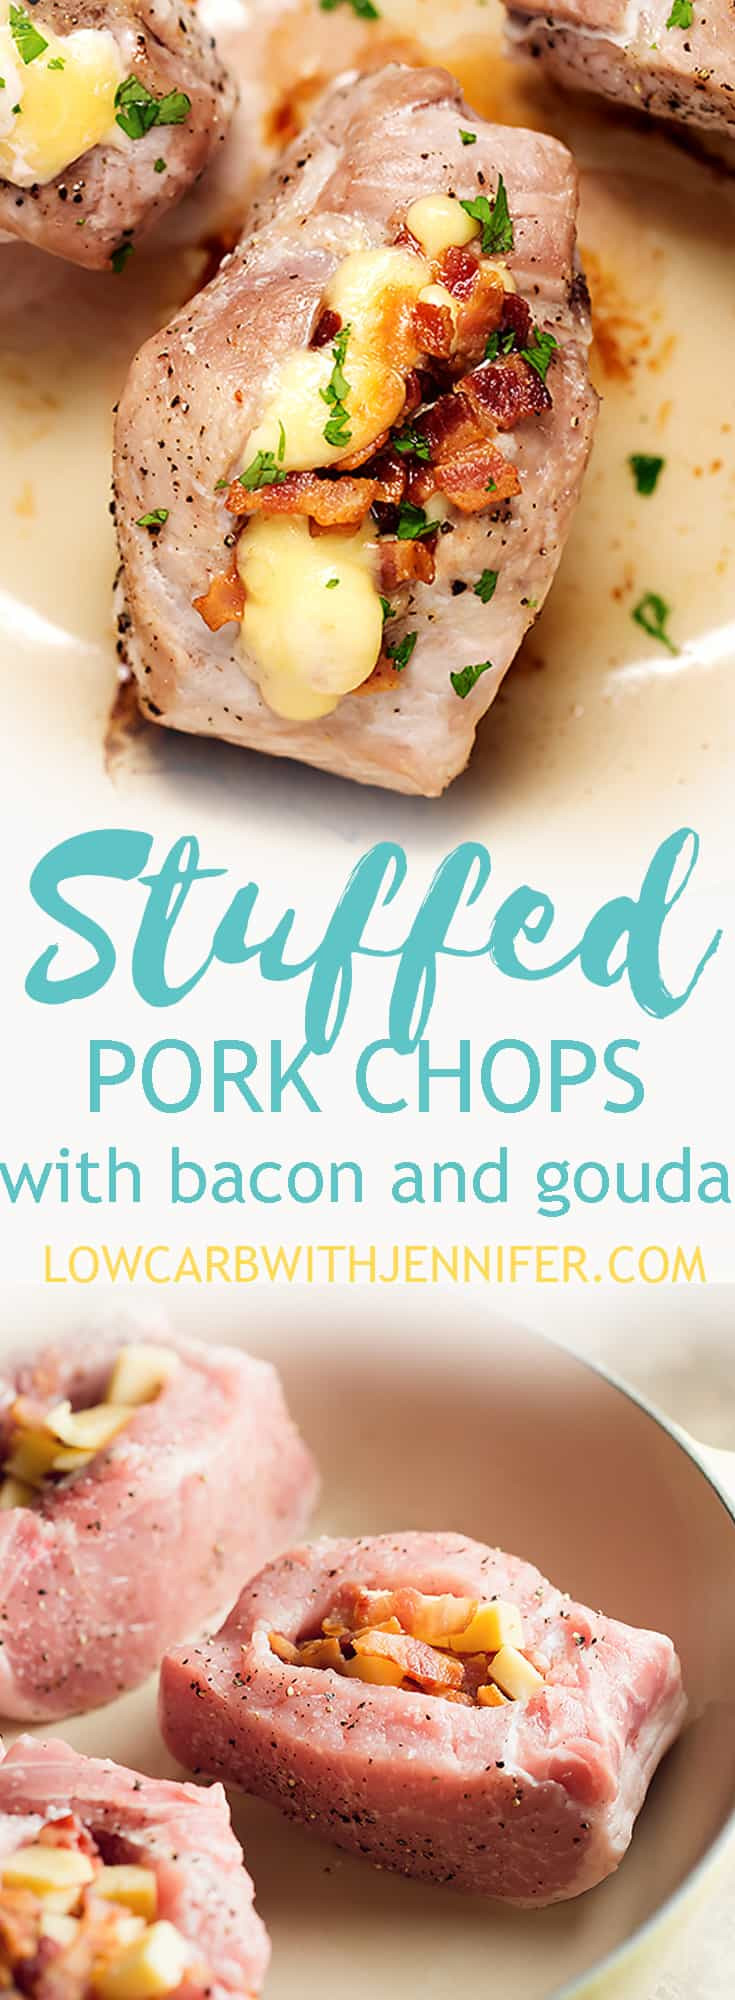 Low Carb Stuffed Pork Chops
 Stuffed Pork Chops with Bacon and Gouda